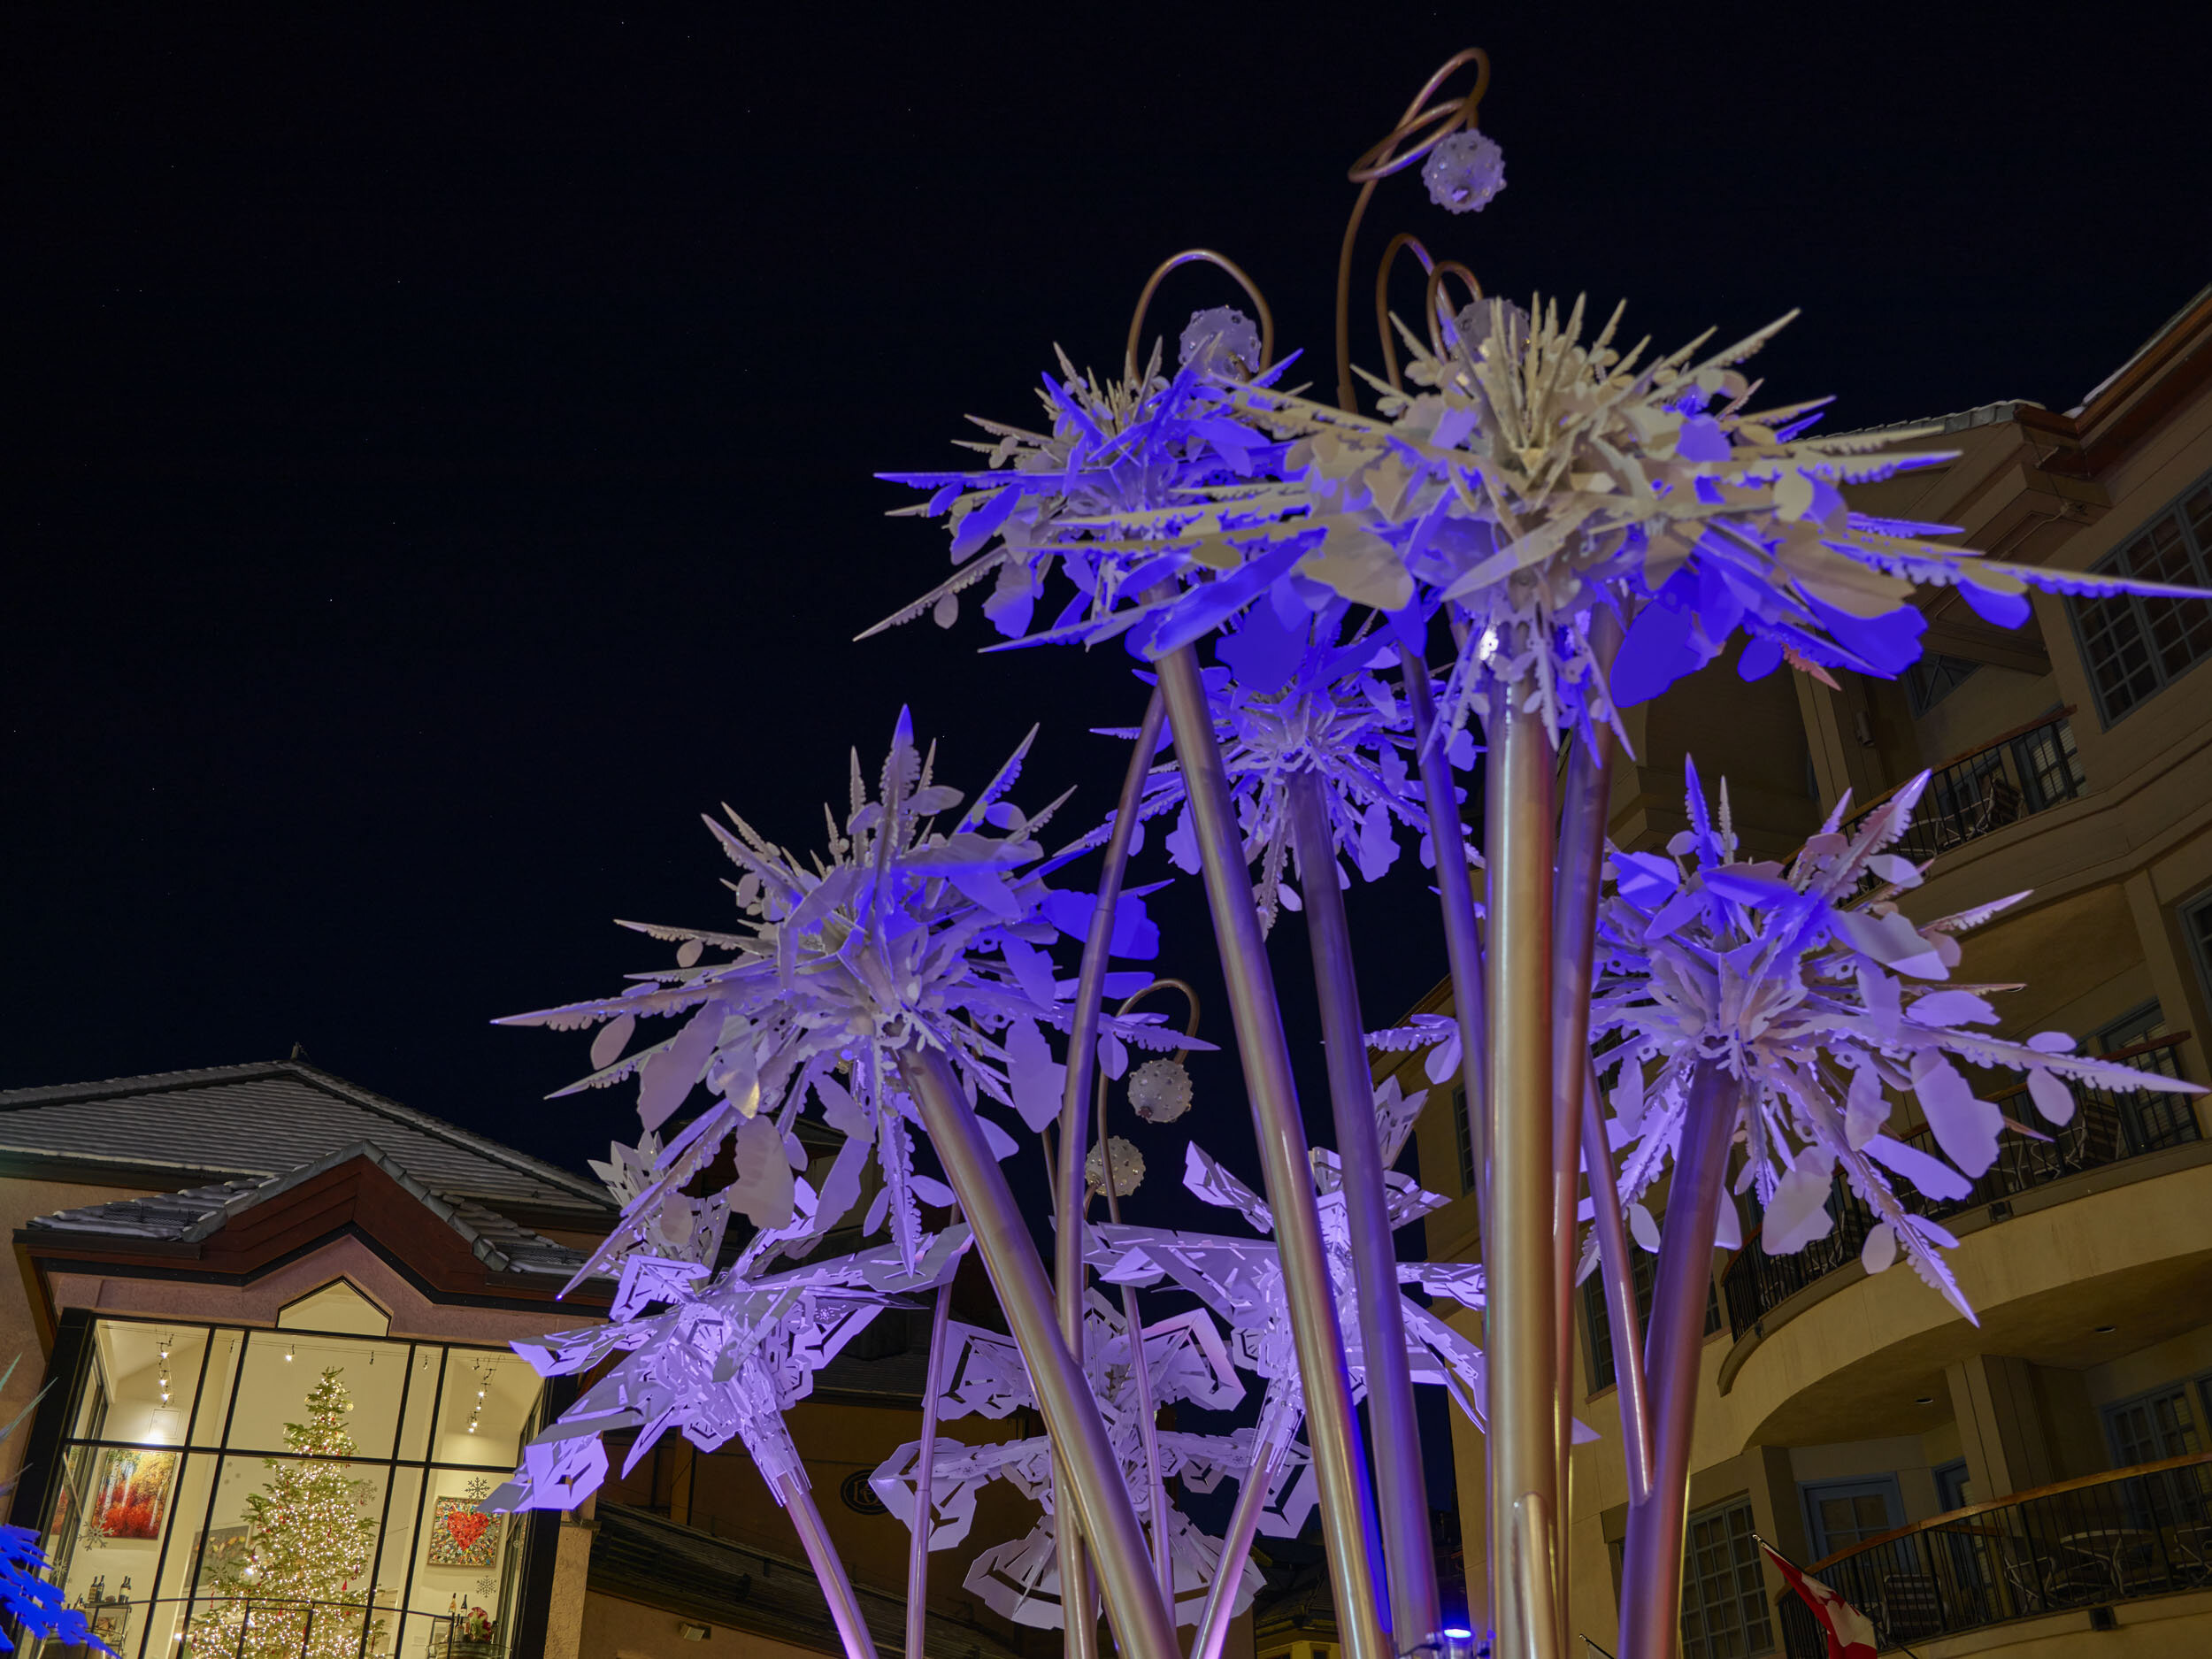   Frost Flowers  Image Courtesy of Beaver Creek Resorts 